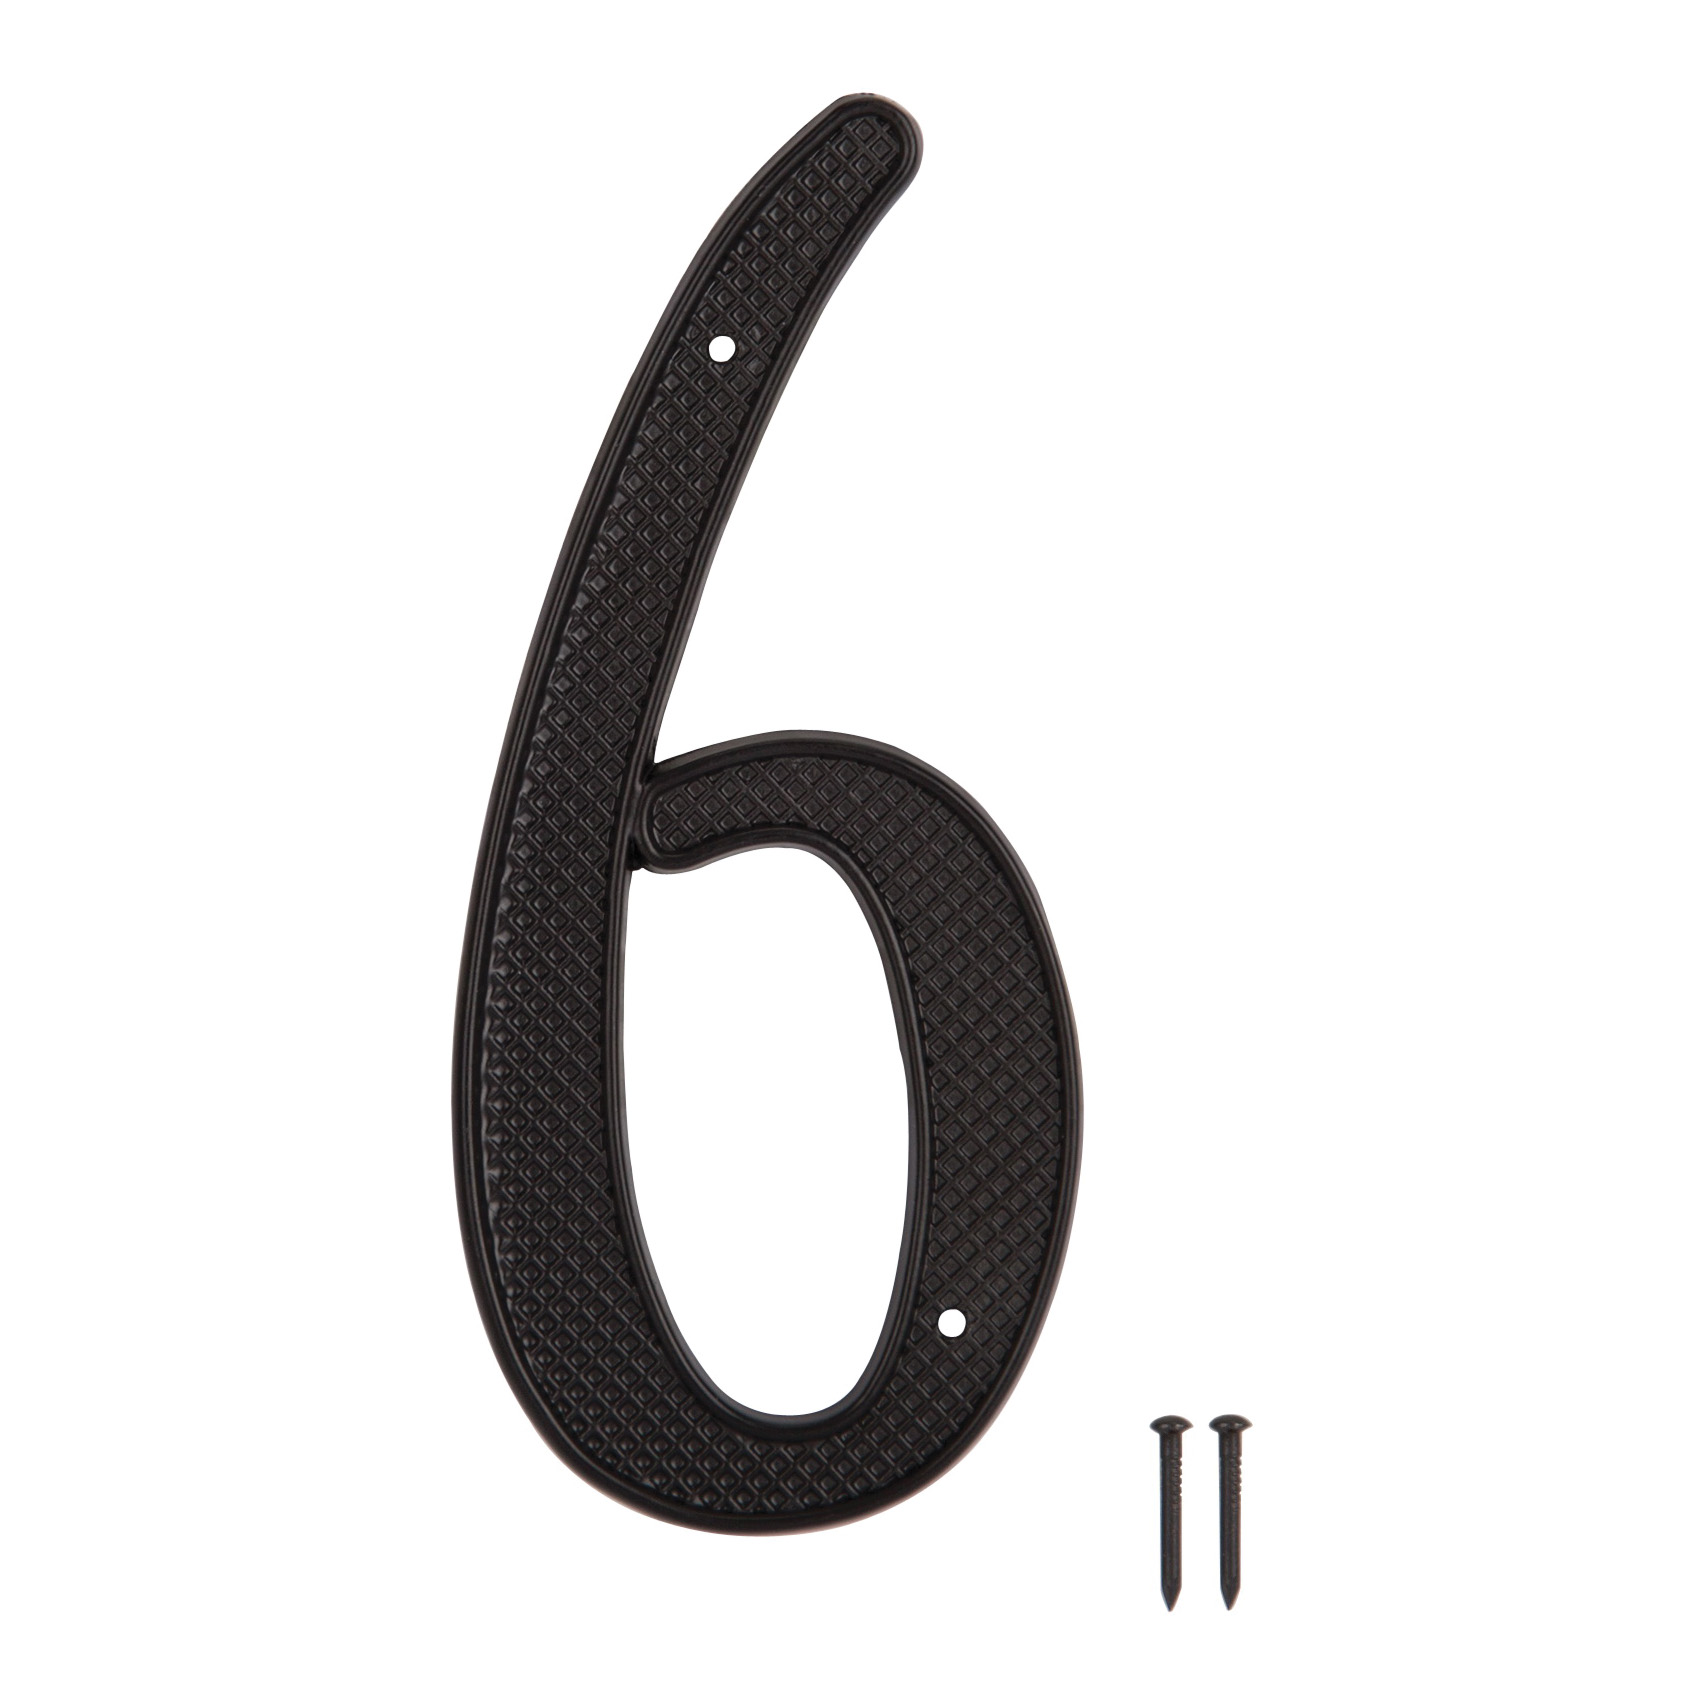 N-016-PS House Number, Character: 6, 4 in H Character, 2.28 in W Character